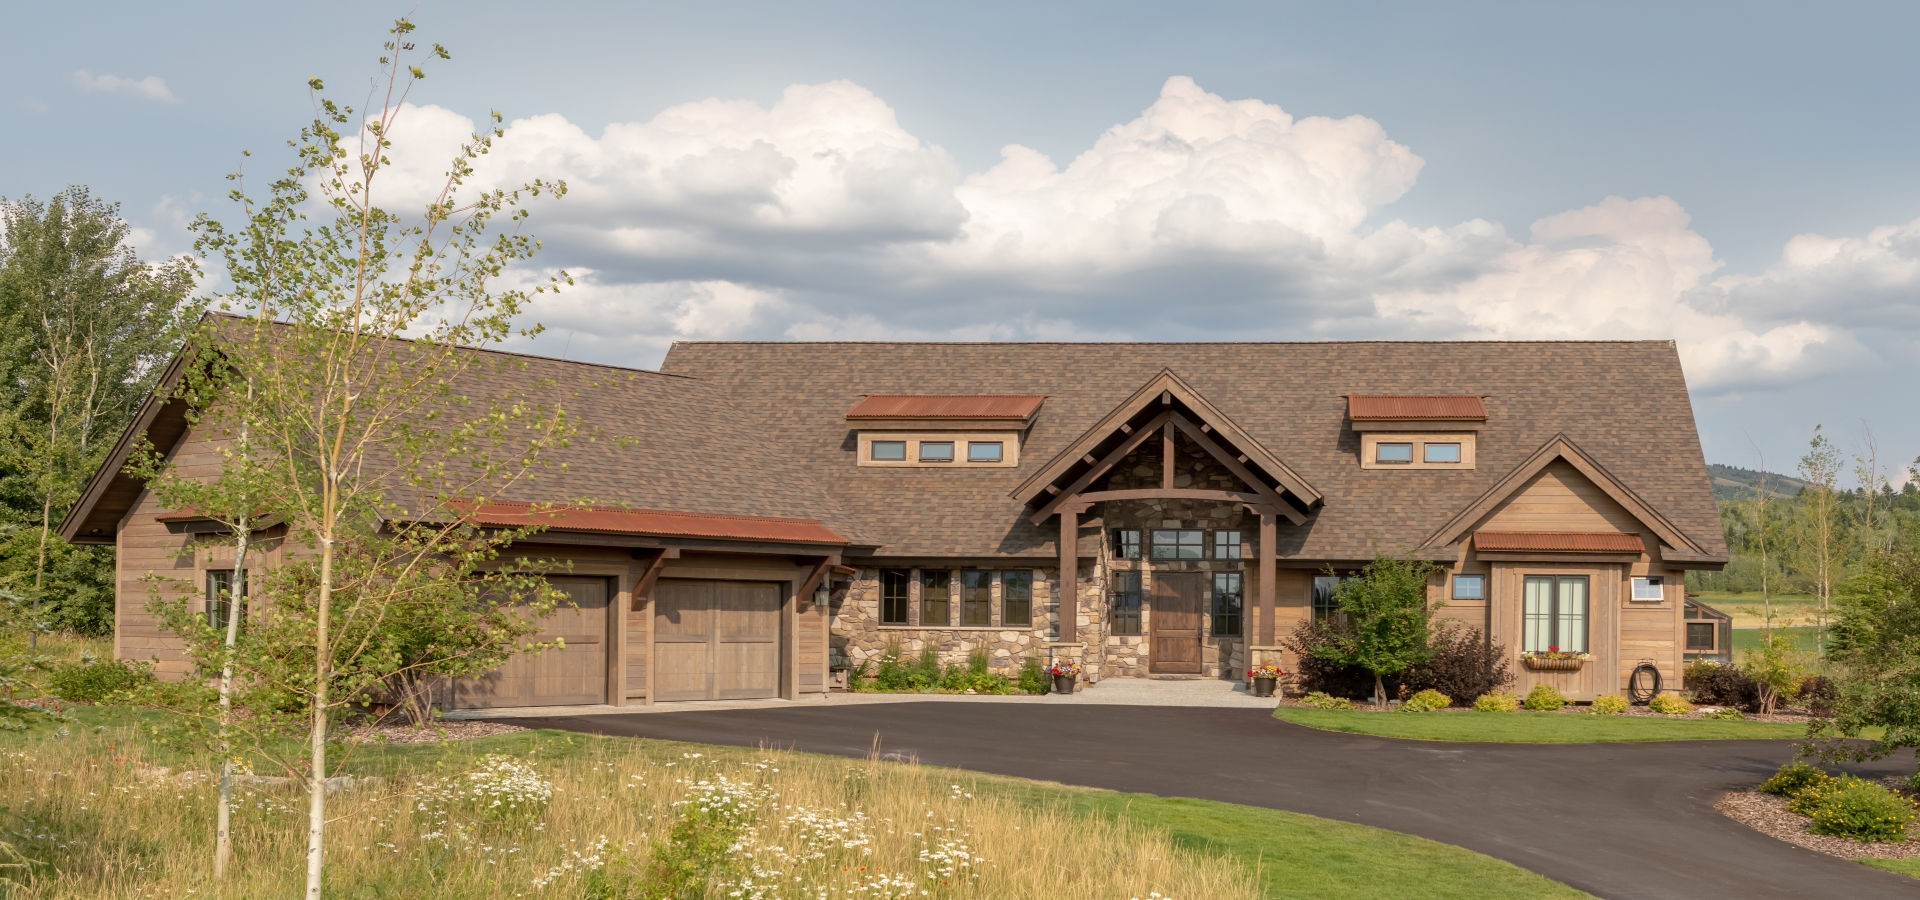 ranchwood™ Exteriors for a true western ranch-style home